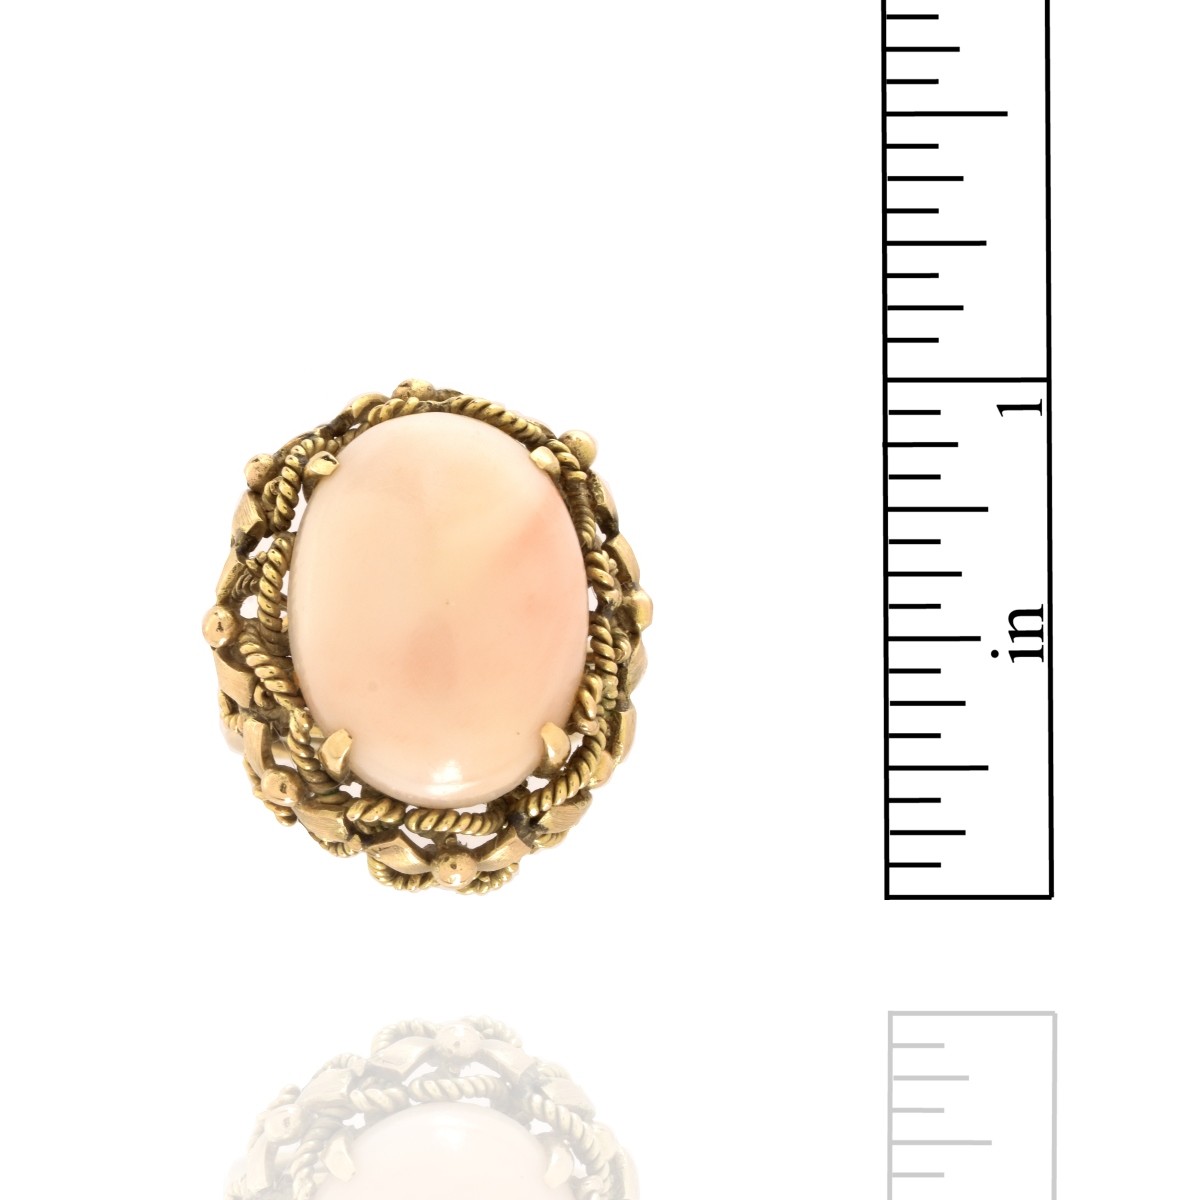 Coral and 14K Ring